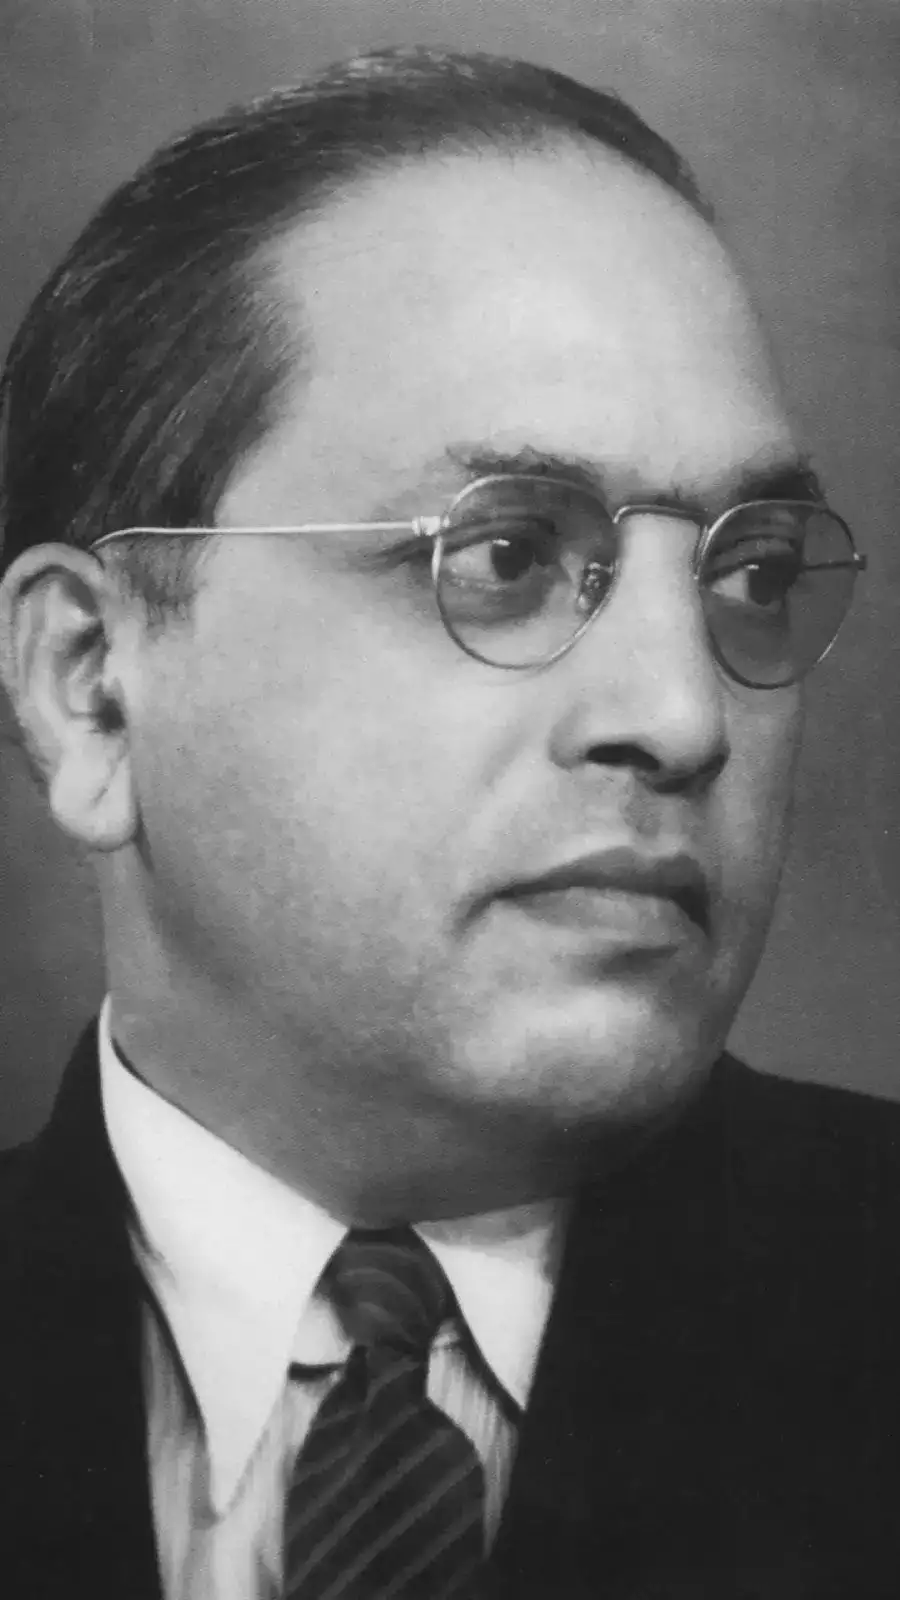 Dr BR Ambedkar academic journey is exemplified by his remarkable global educational accomplishments